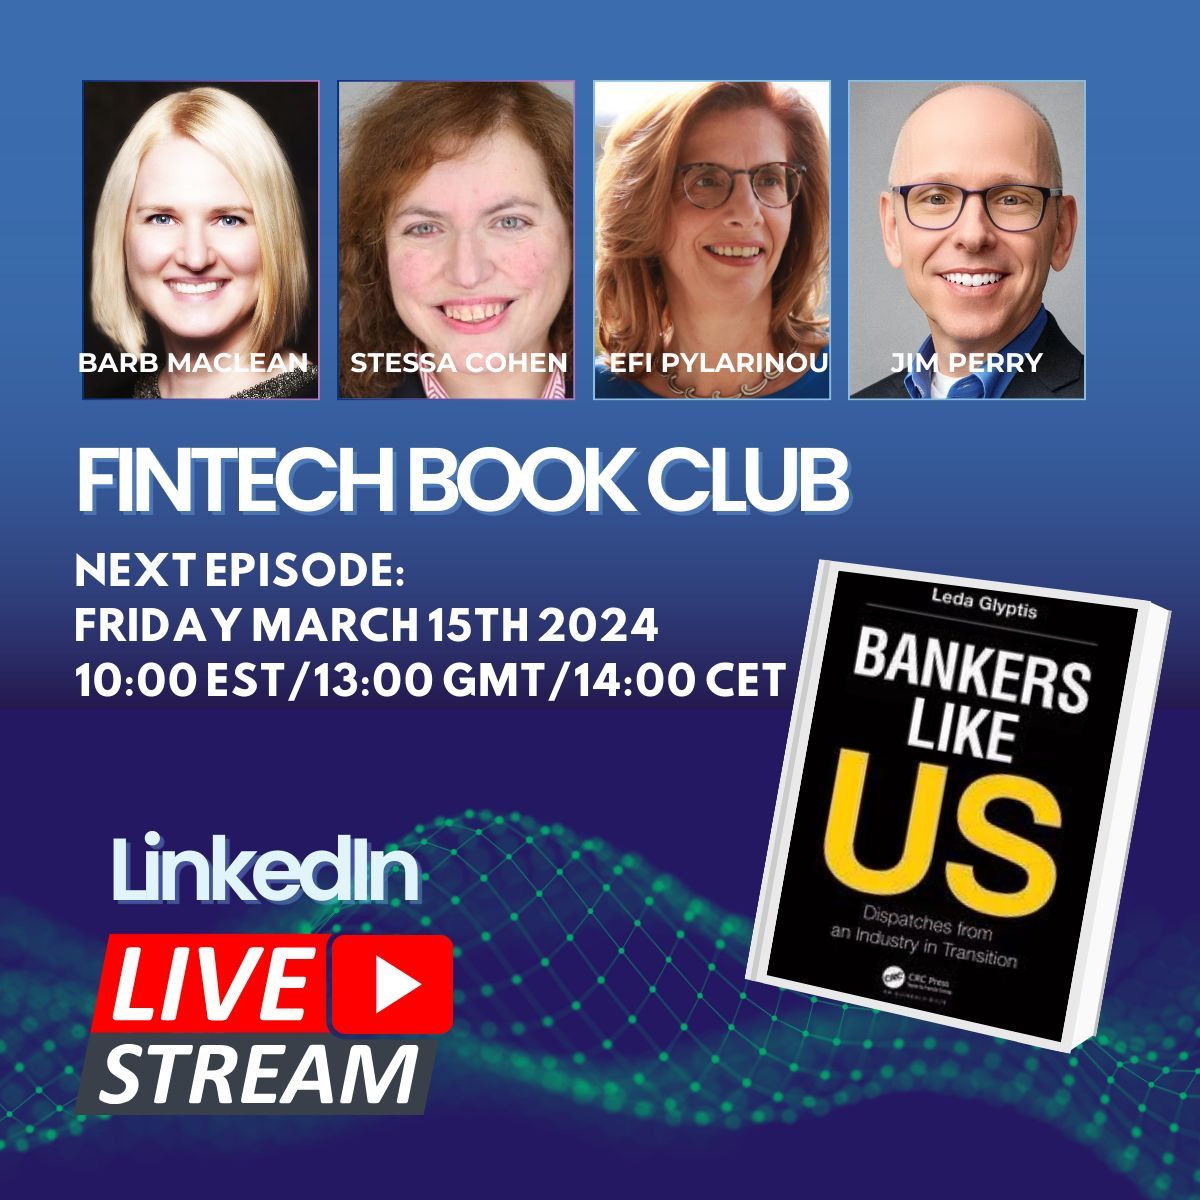 👉🏼 At 10am ET, I'll be joining @stessacohen, Barb MacLean & @efipm on LinkedIn Live to review @LedaGlyptis' book, Bankers Like Us. It promises to be another great meeting of the #FintechBookClub. Join us!👨‍💻 buff.ly/3wV3tZX